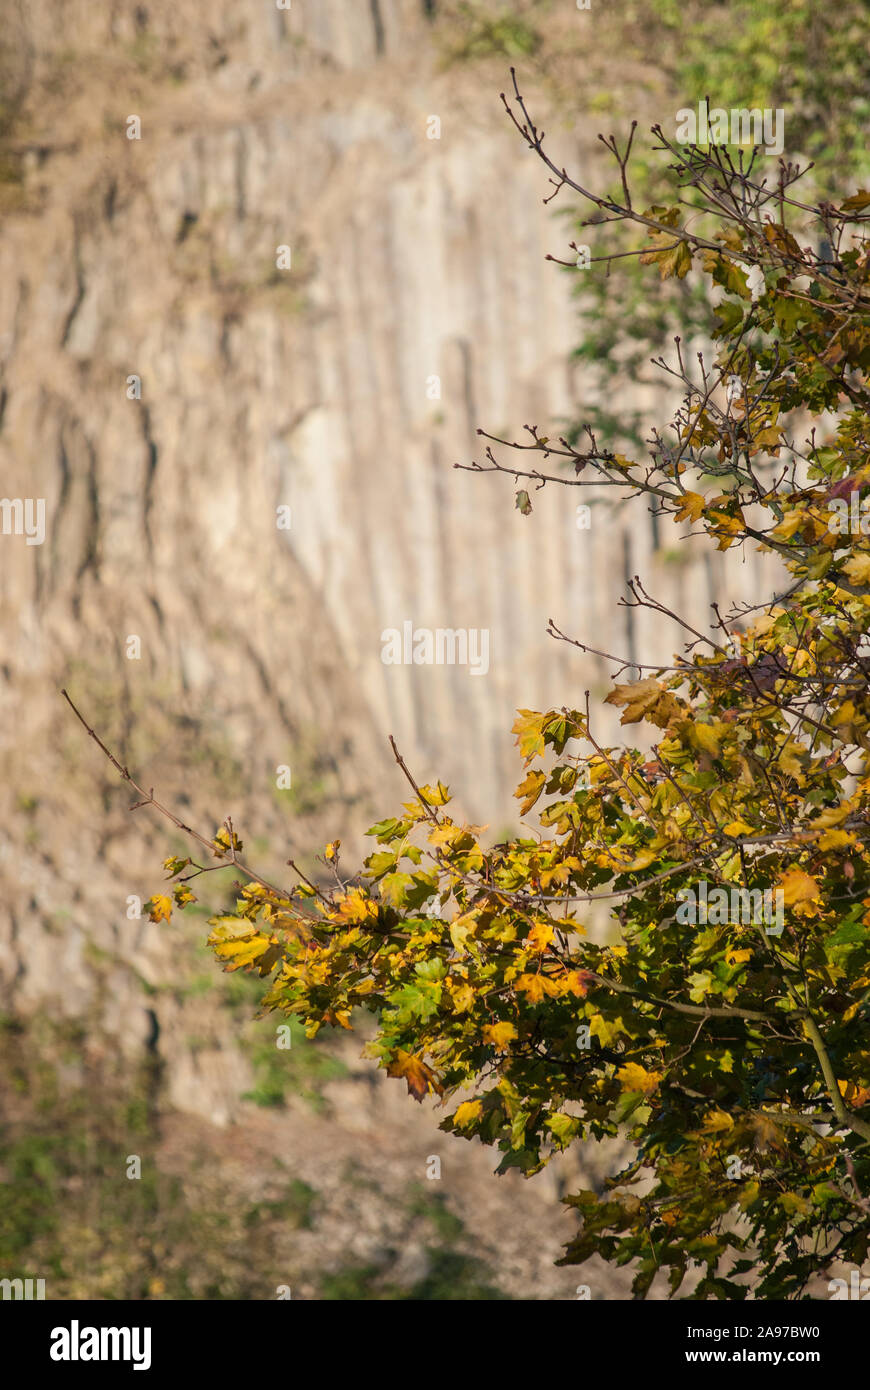 Branch with autumnal foliage in front of a rock wall. November Scene. Stock Photo